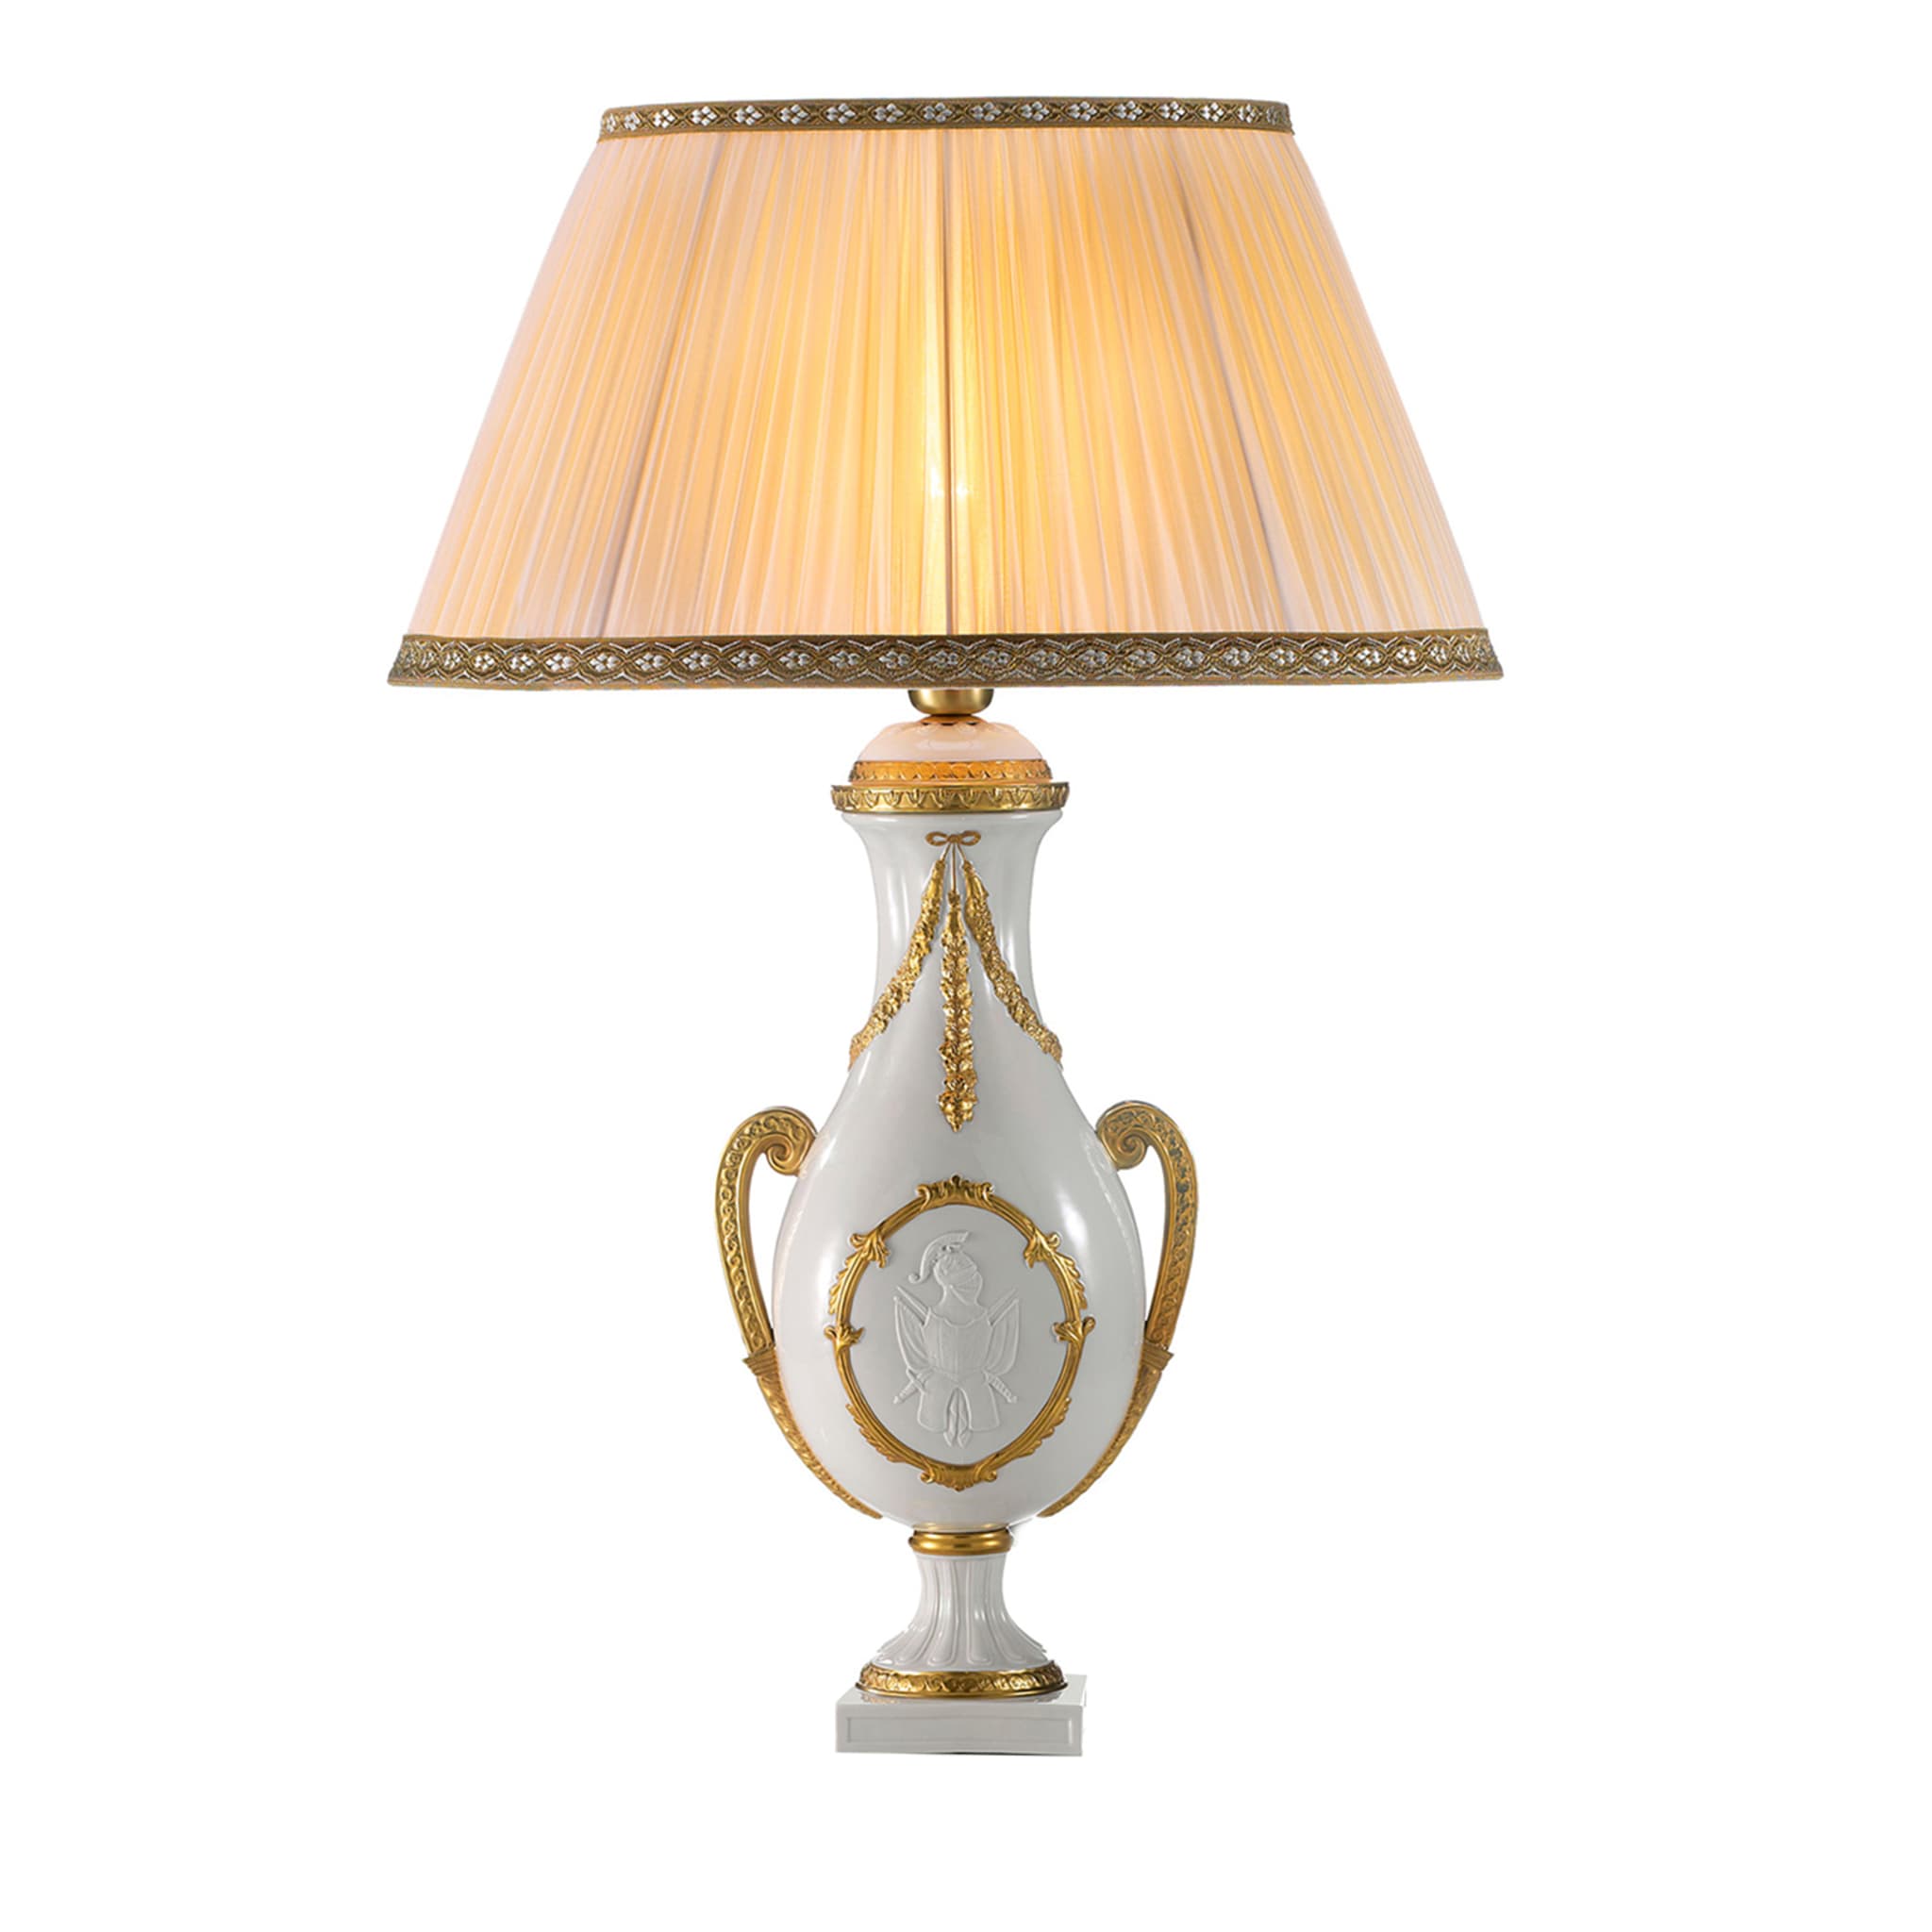 Bordeaux Table Lamp with Handles and Cameo - Main view